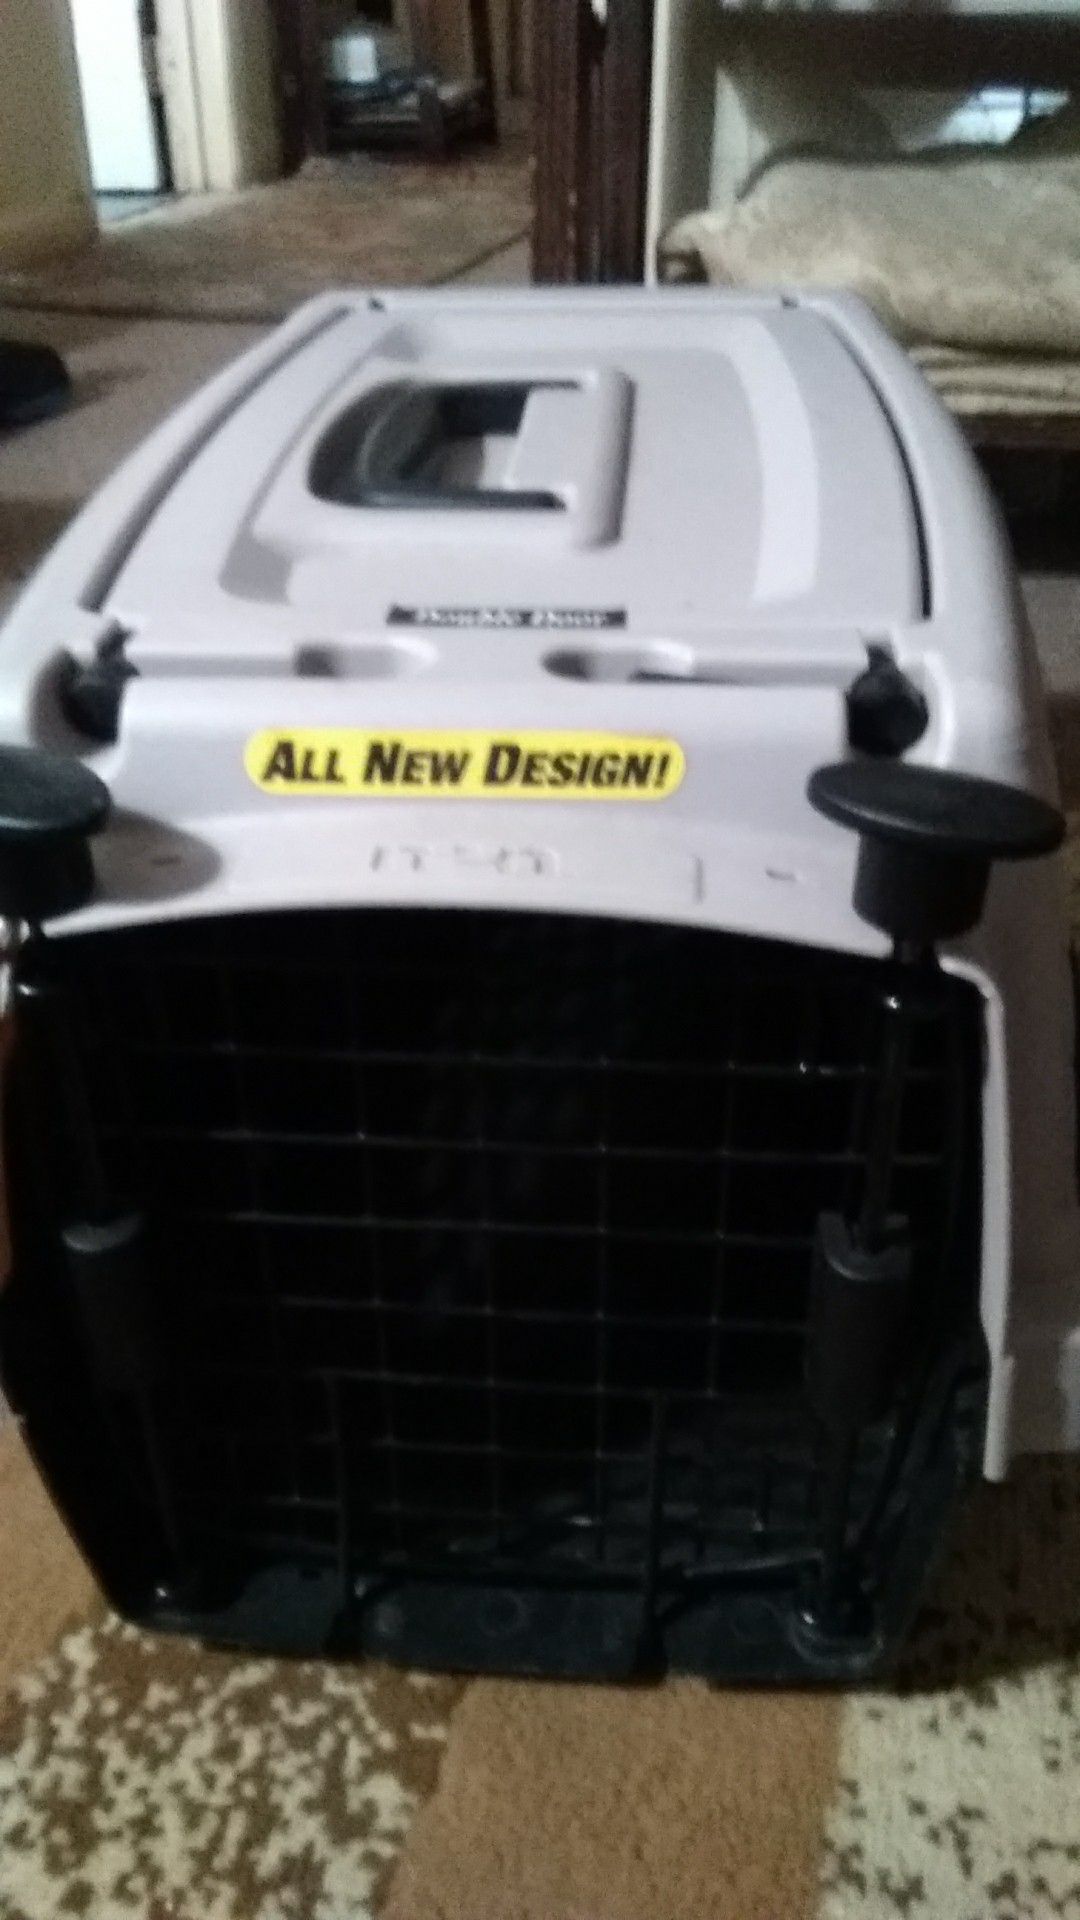 Brand new small pet carrier